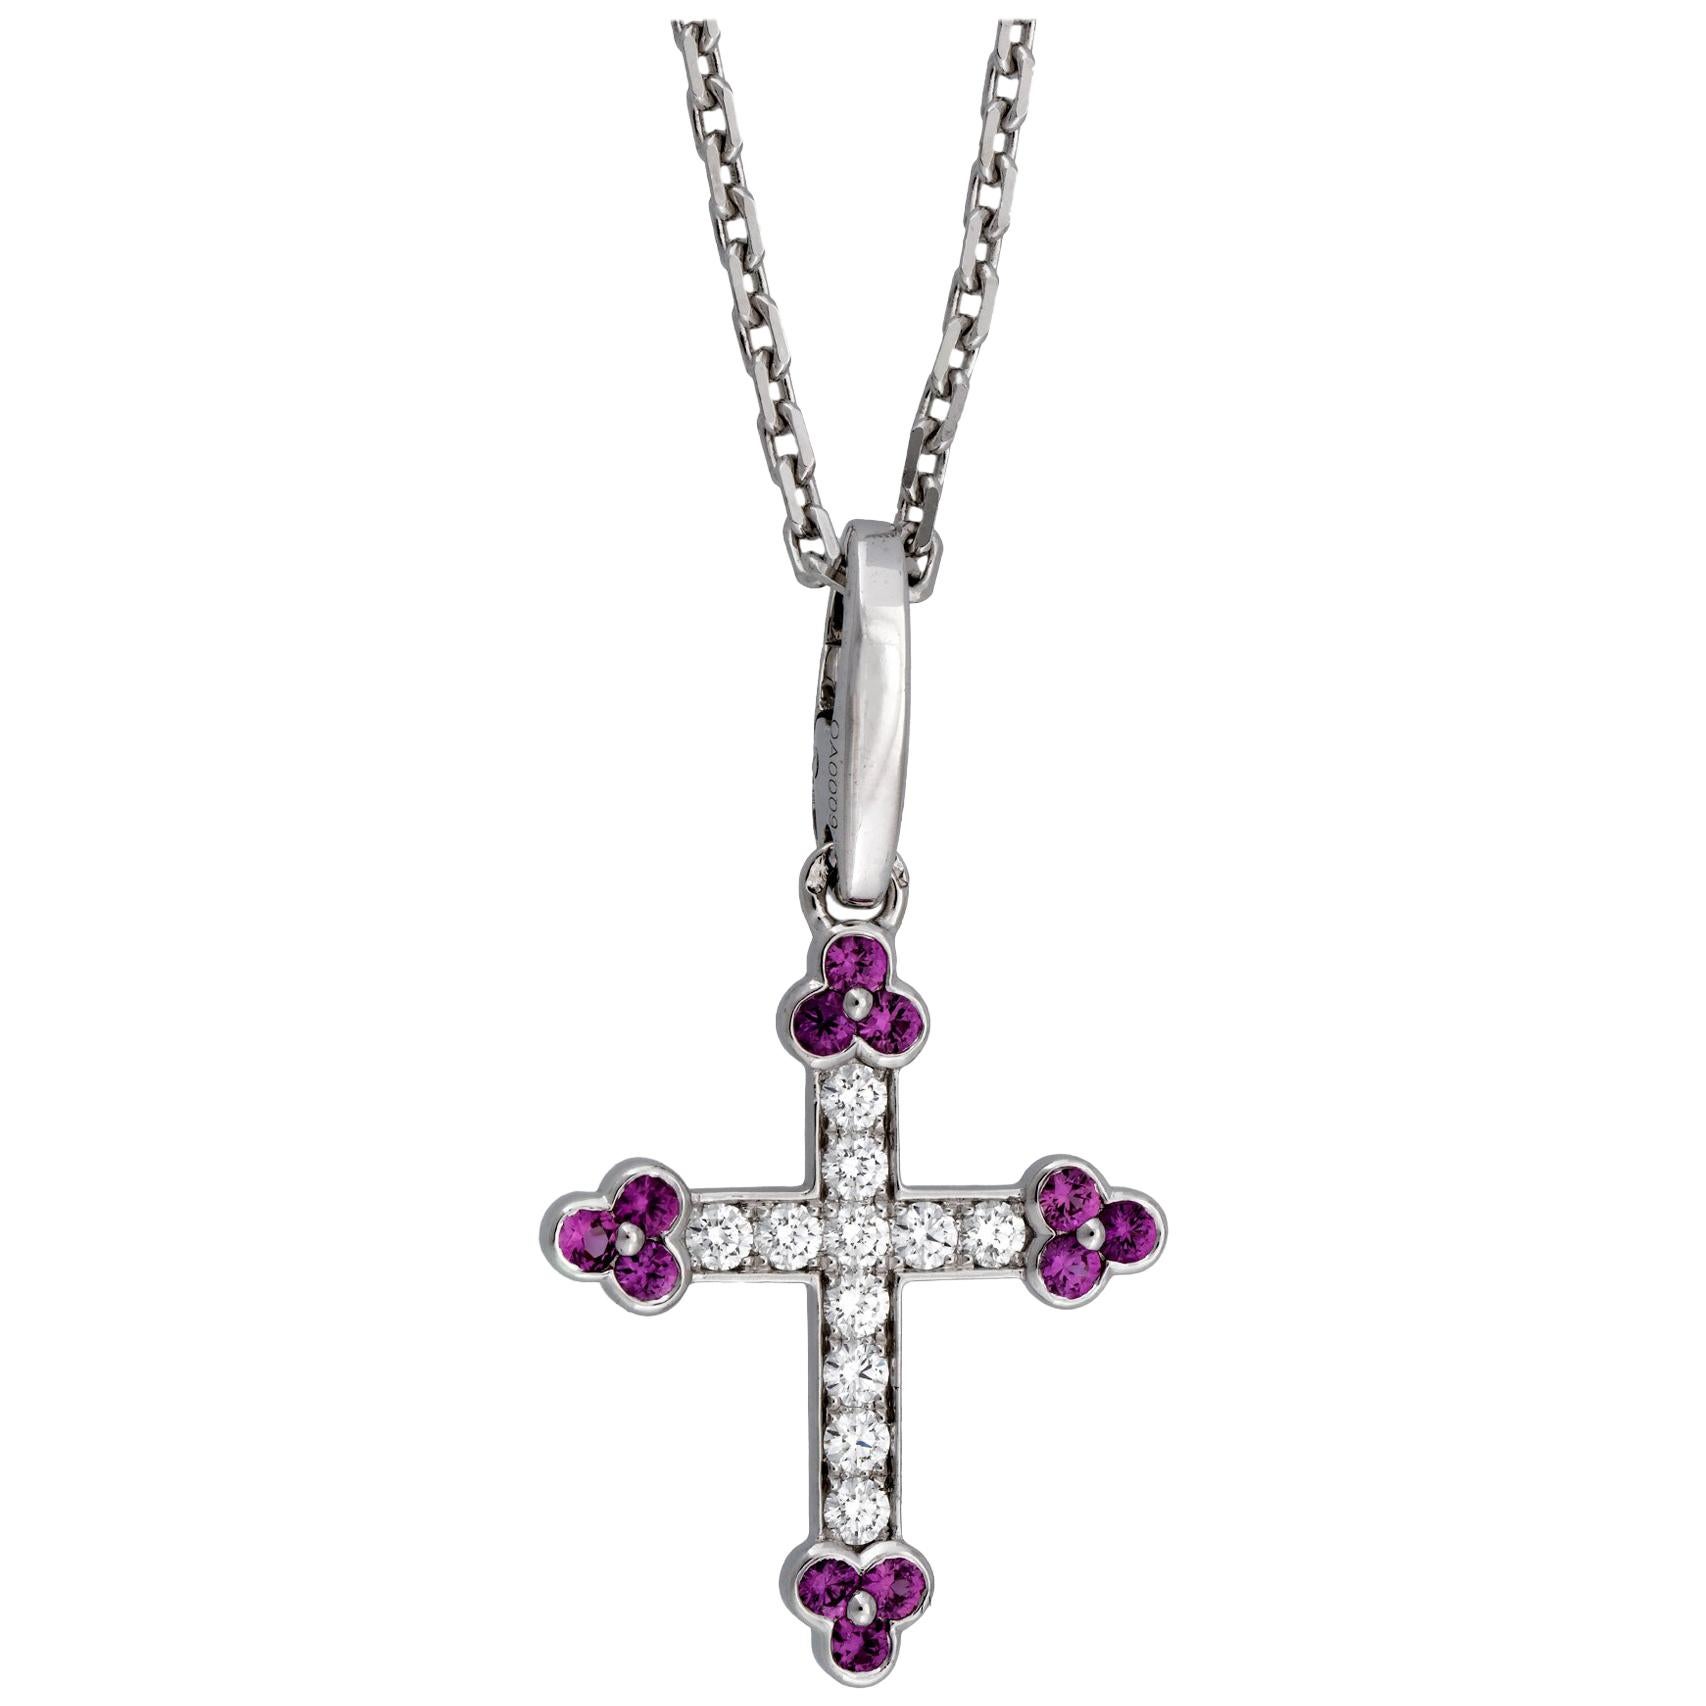 Cartier 18 Karat White Gold Ruby and Diamond Cross Necklace